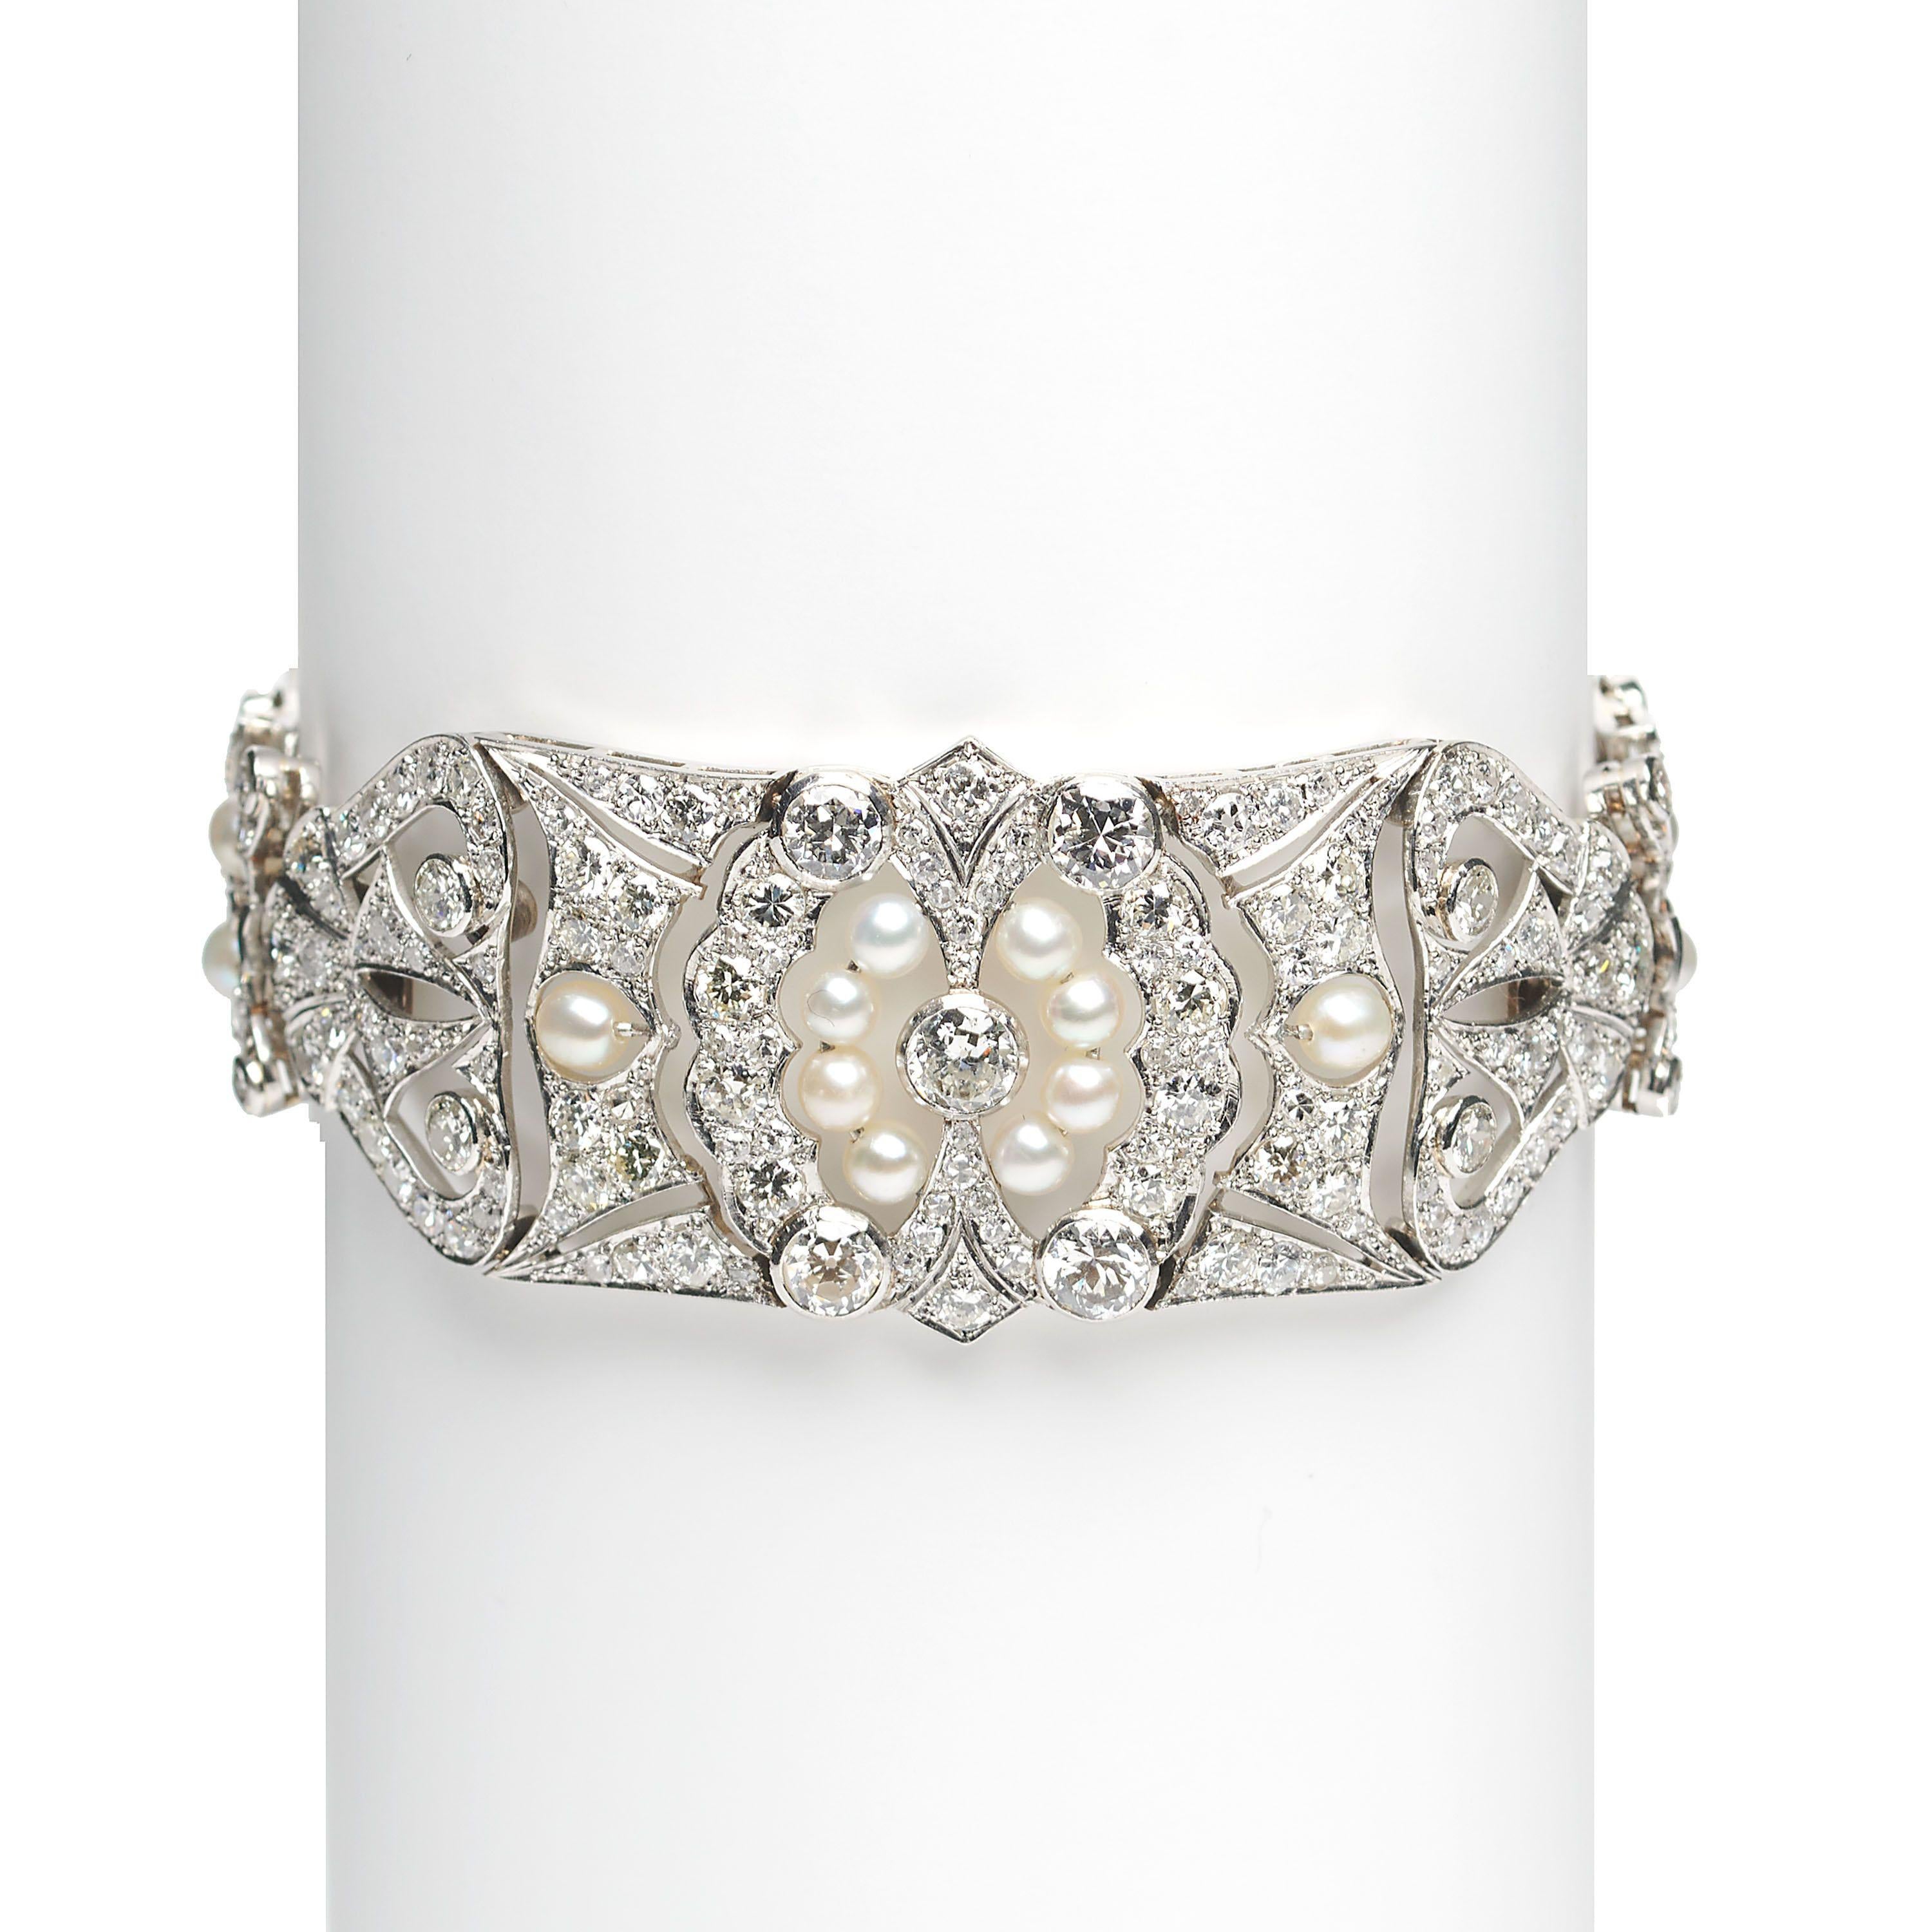 Art Deco Early 20th Century Pearl, Diamond And Platinum Bracelet, Circa 1920, 8.90 Carats For Sale